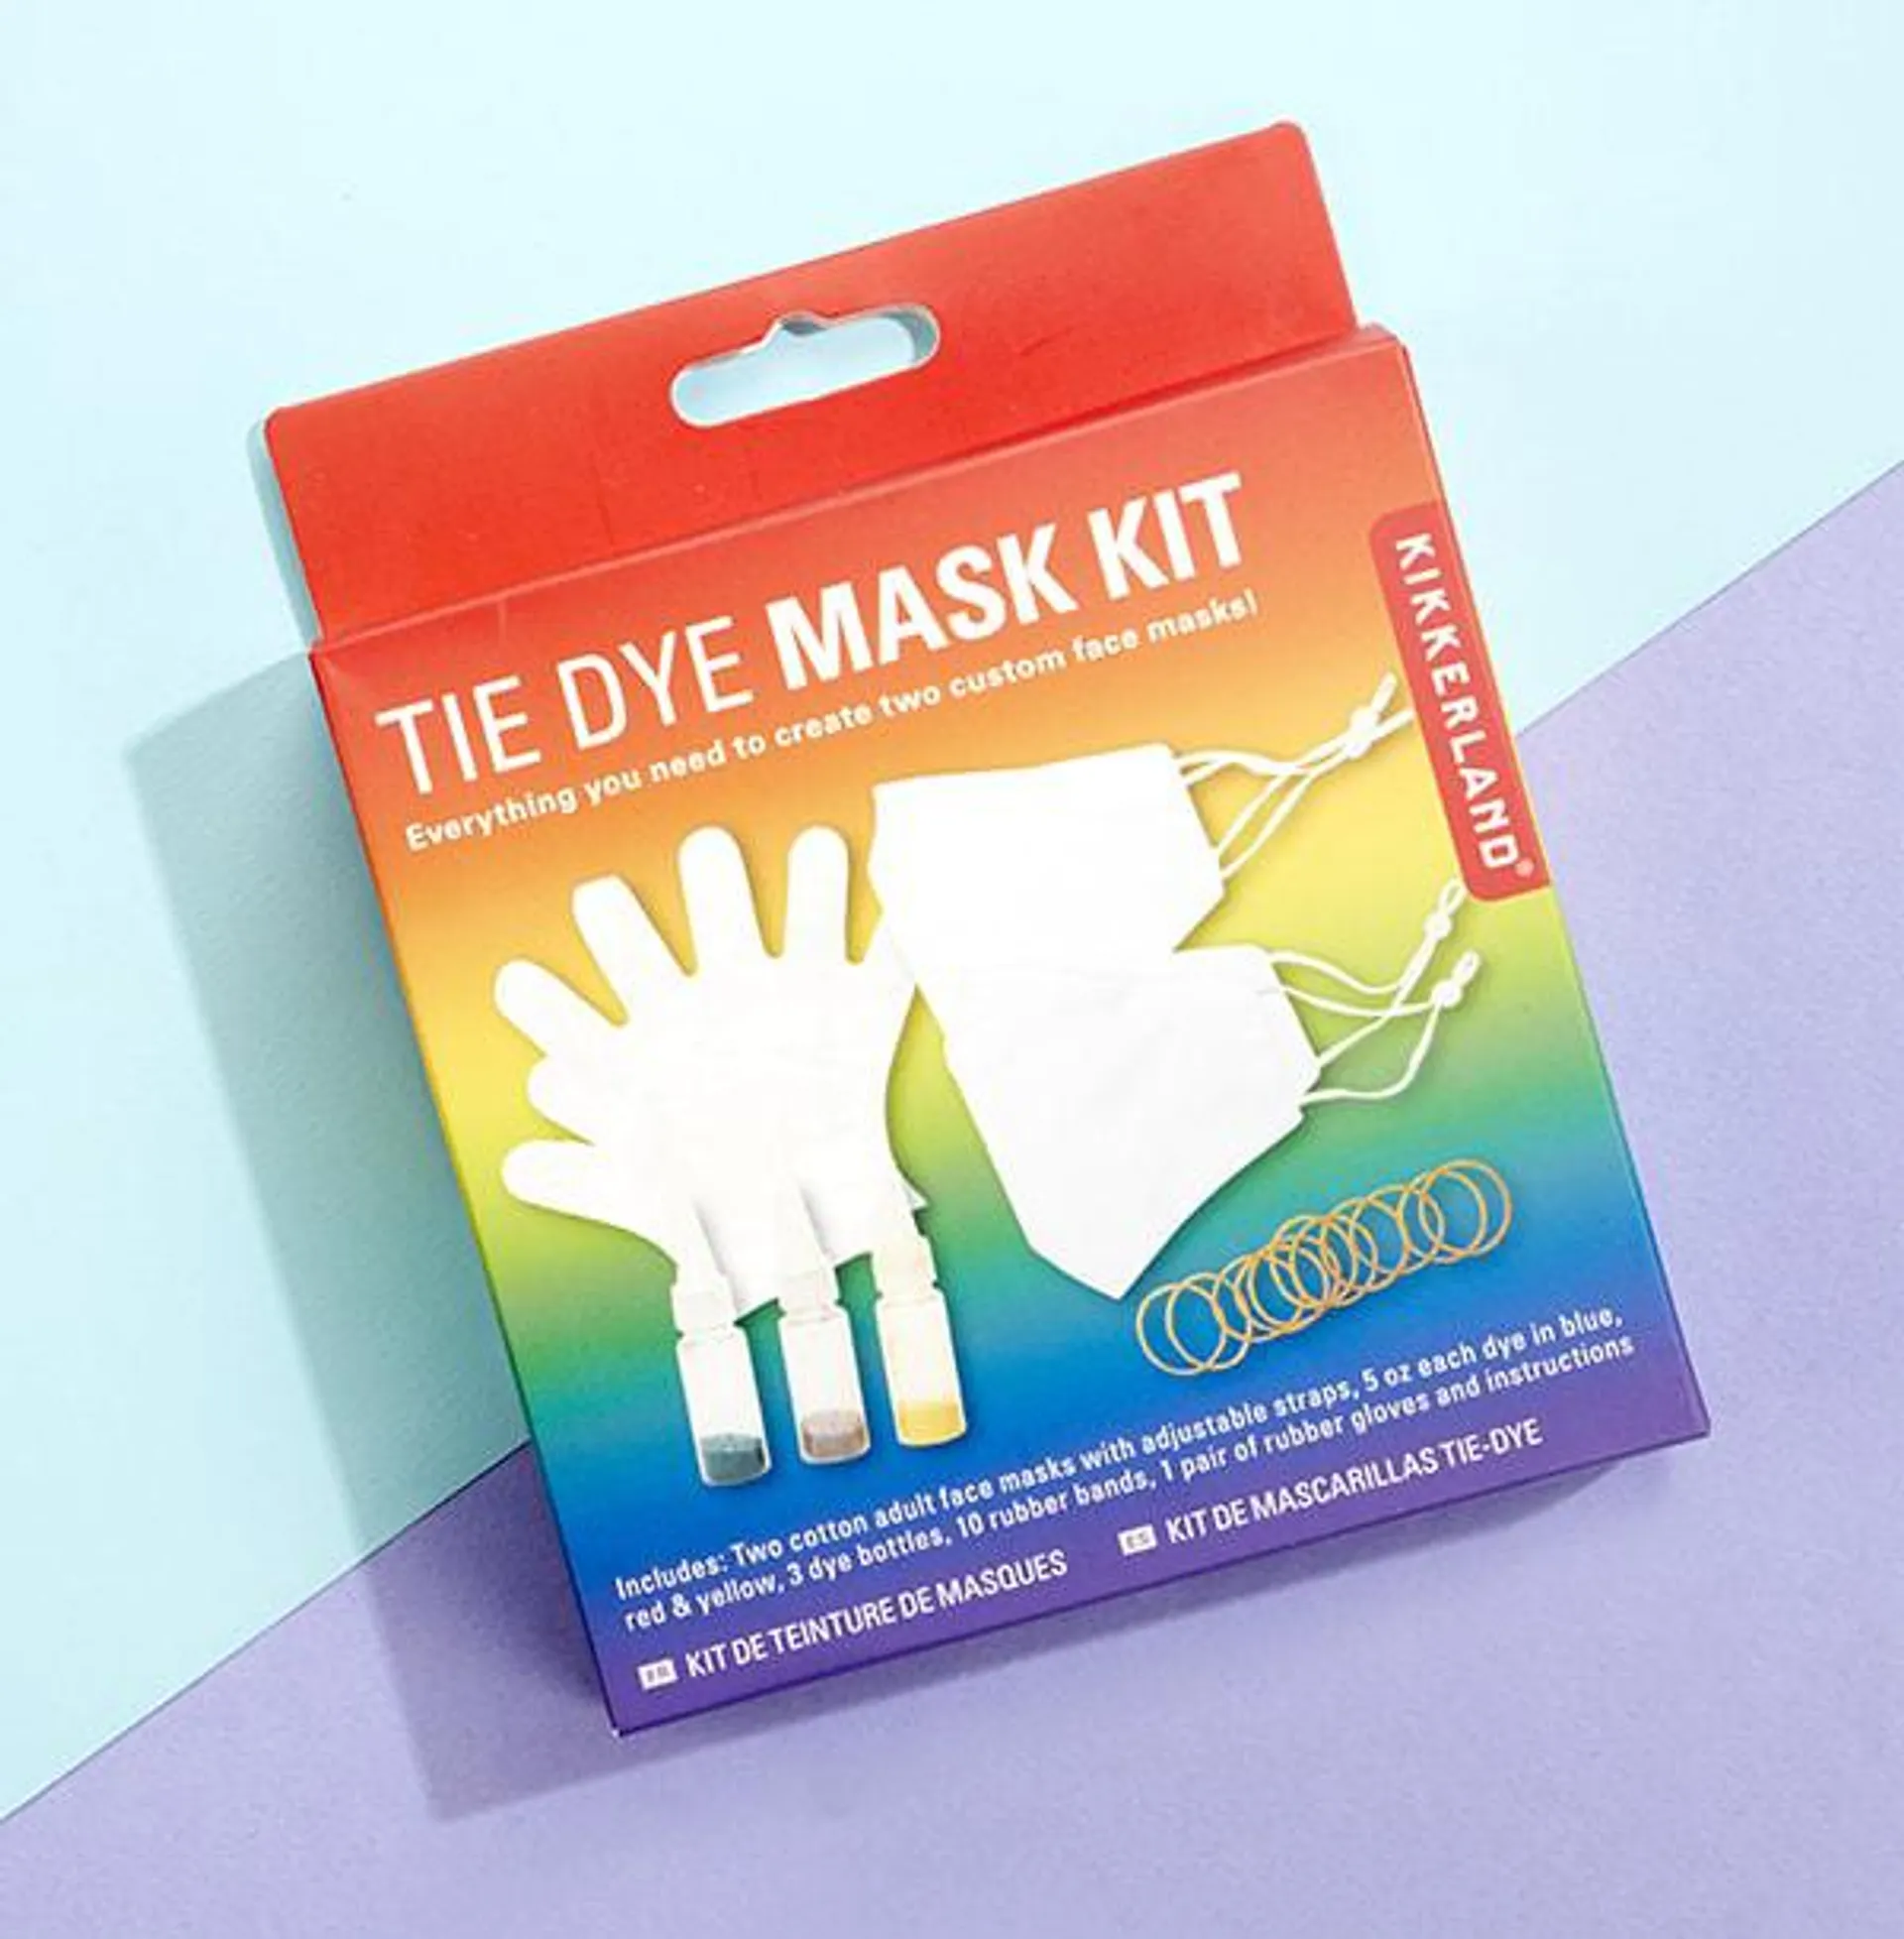 Tie Dye Face Mask Kit WAS £12.99 NOW £6.99